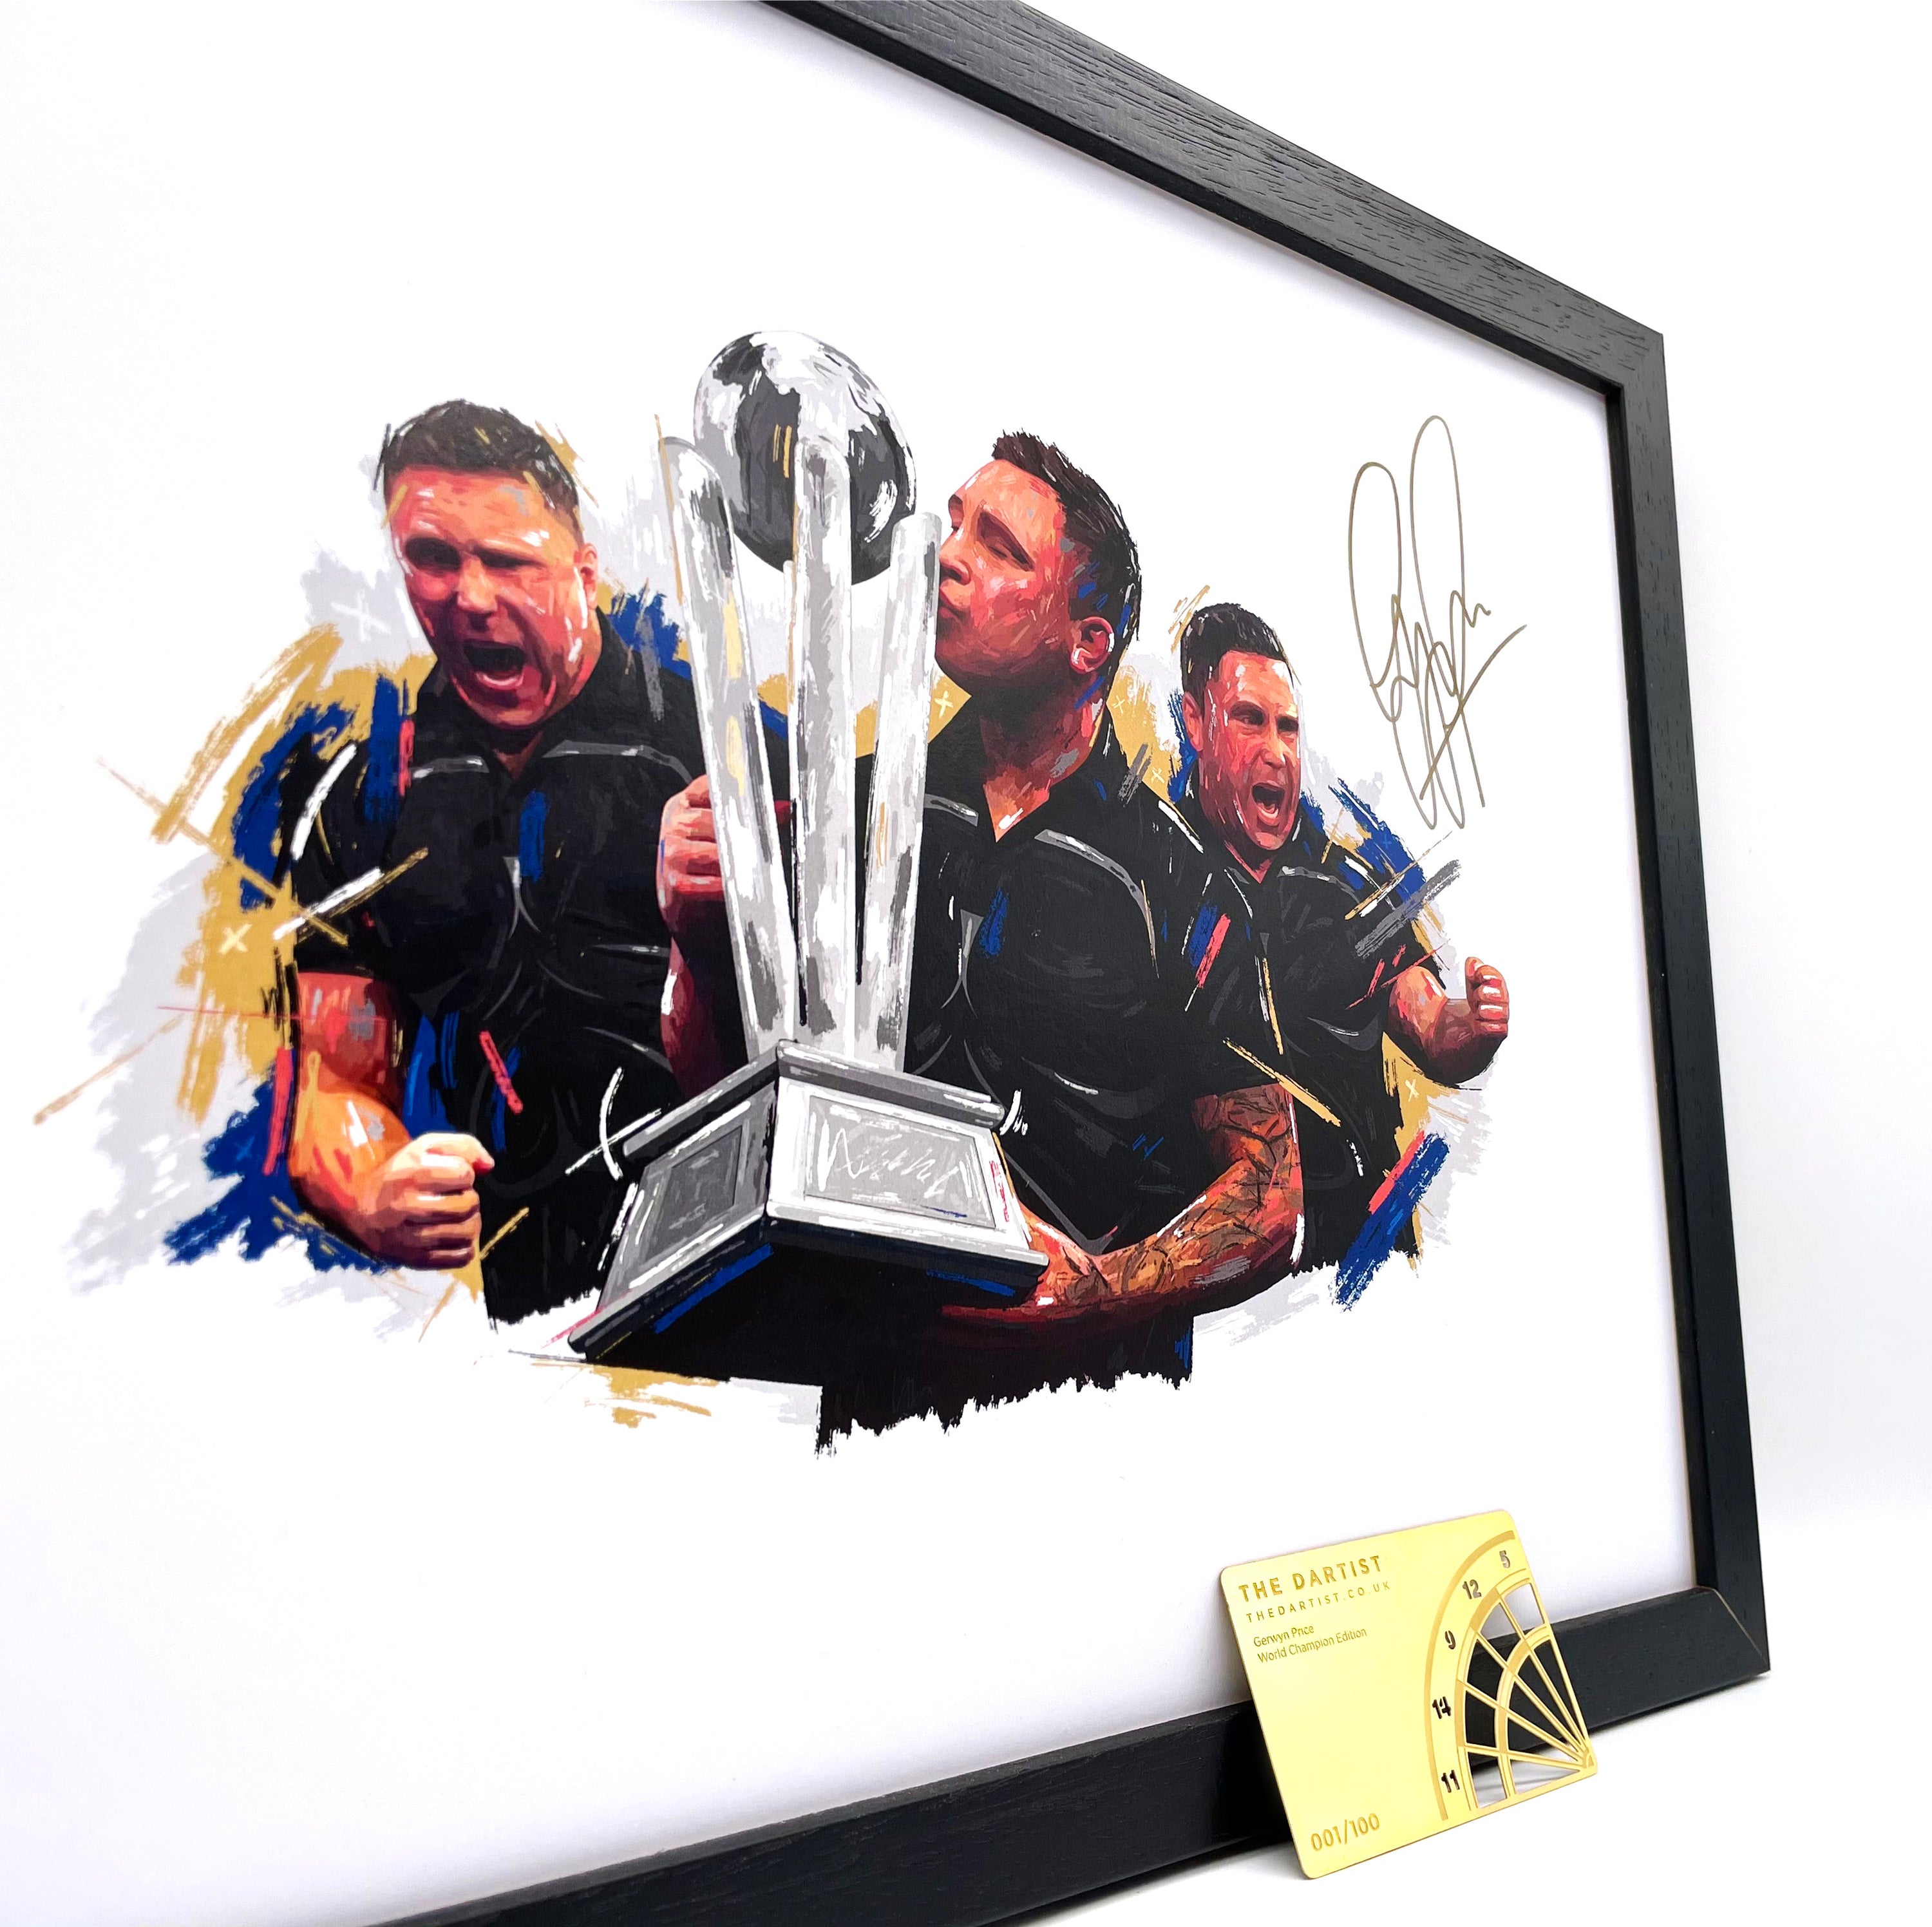 Special Edition Hand Signed Gerwyn Price Print - The Dartist